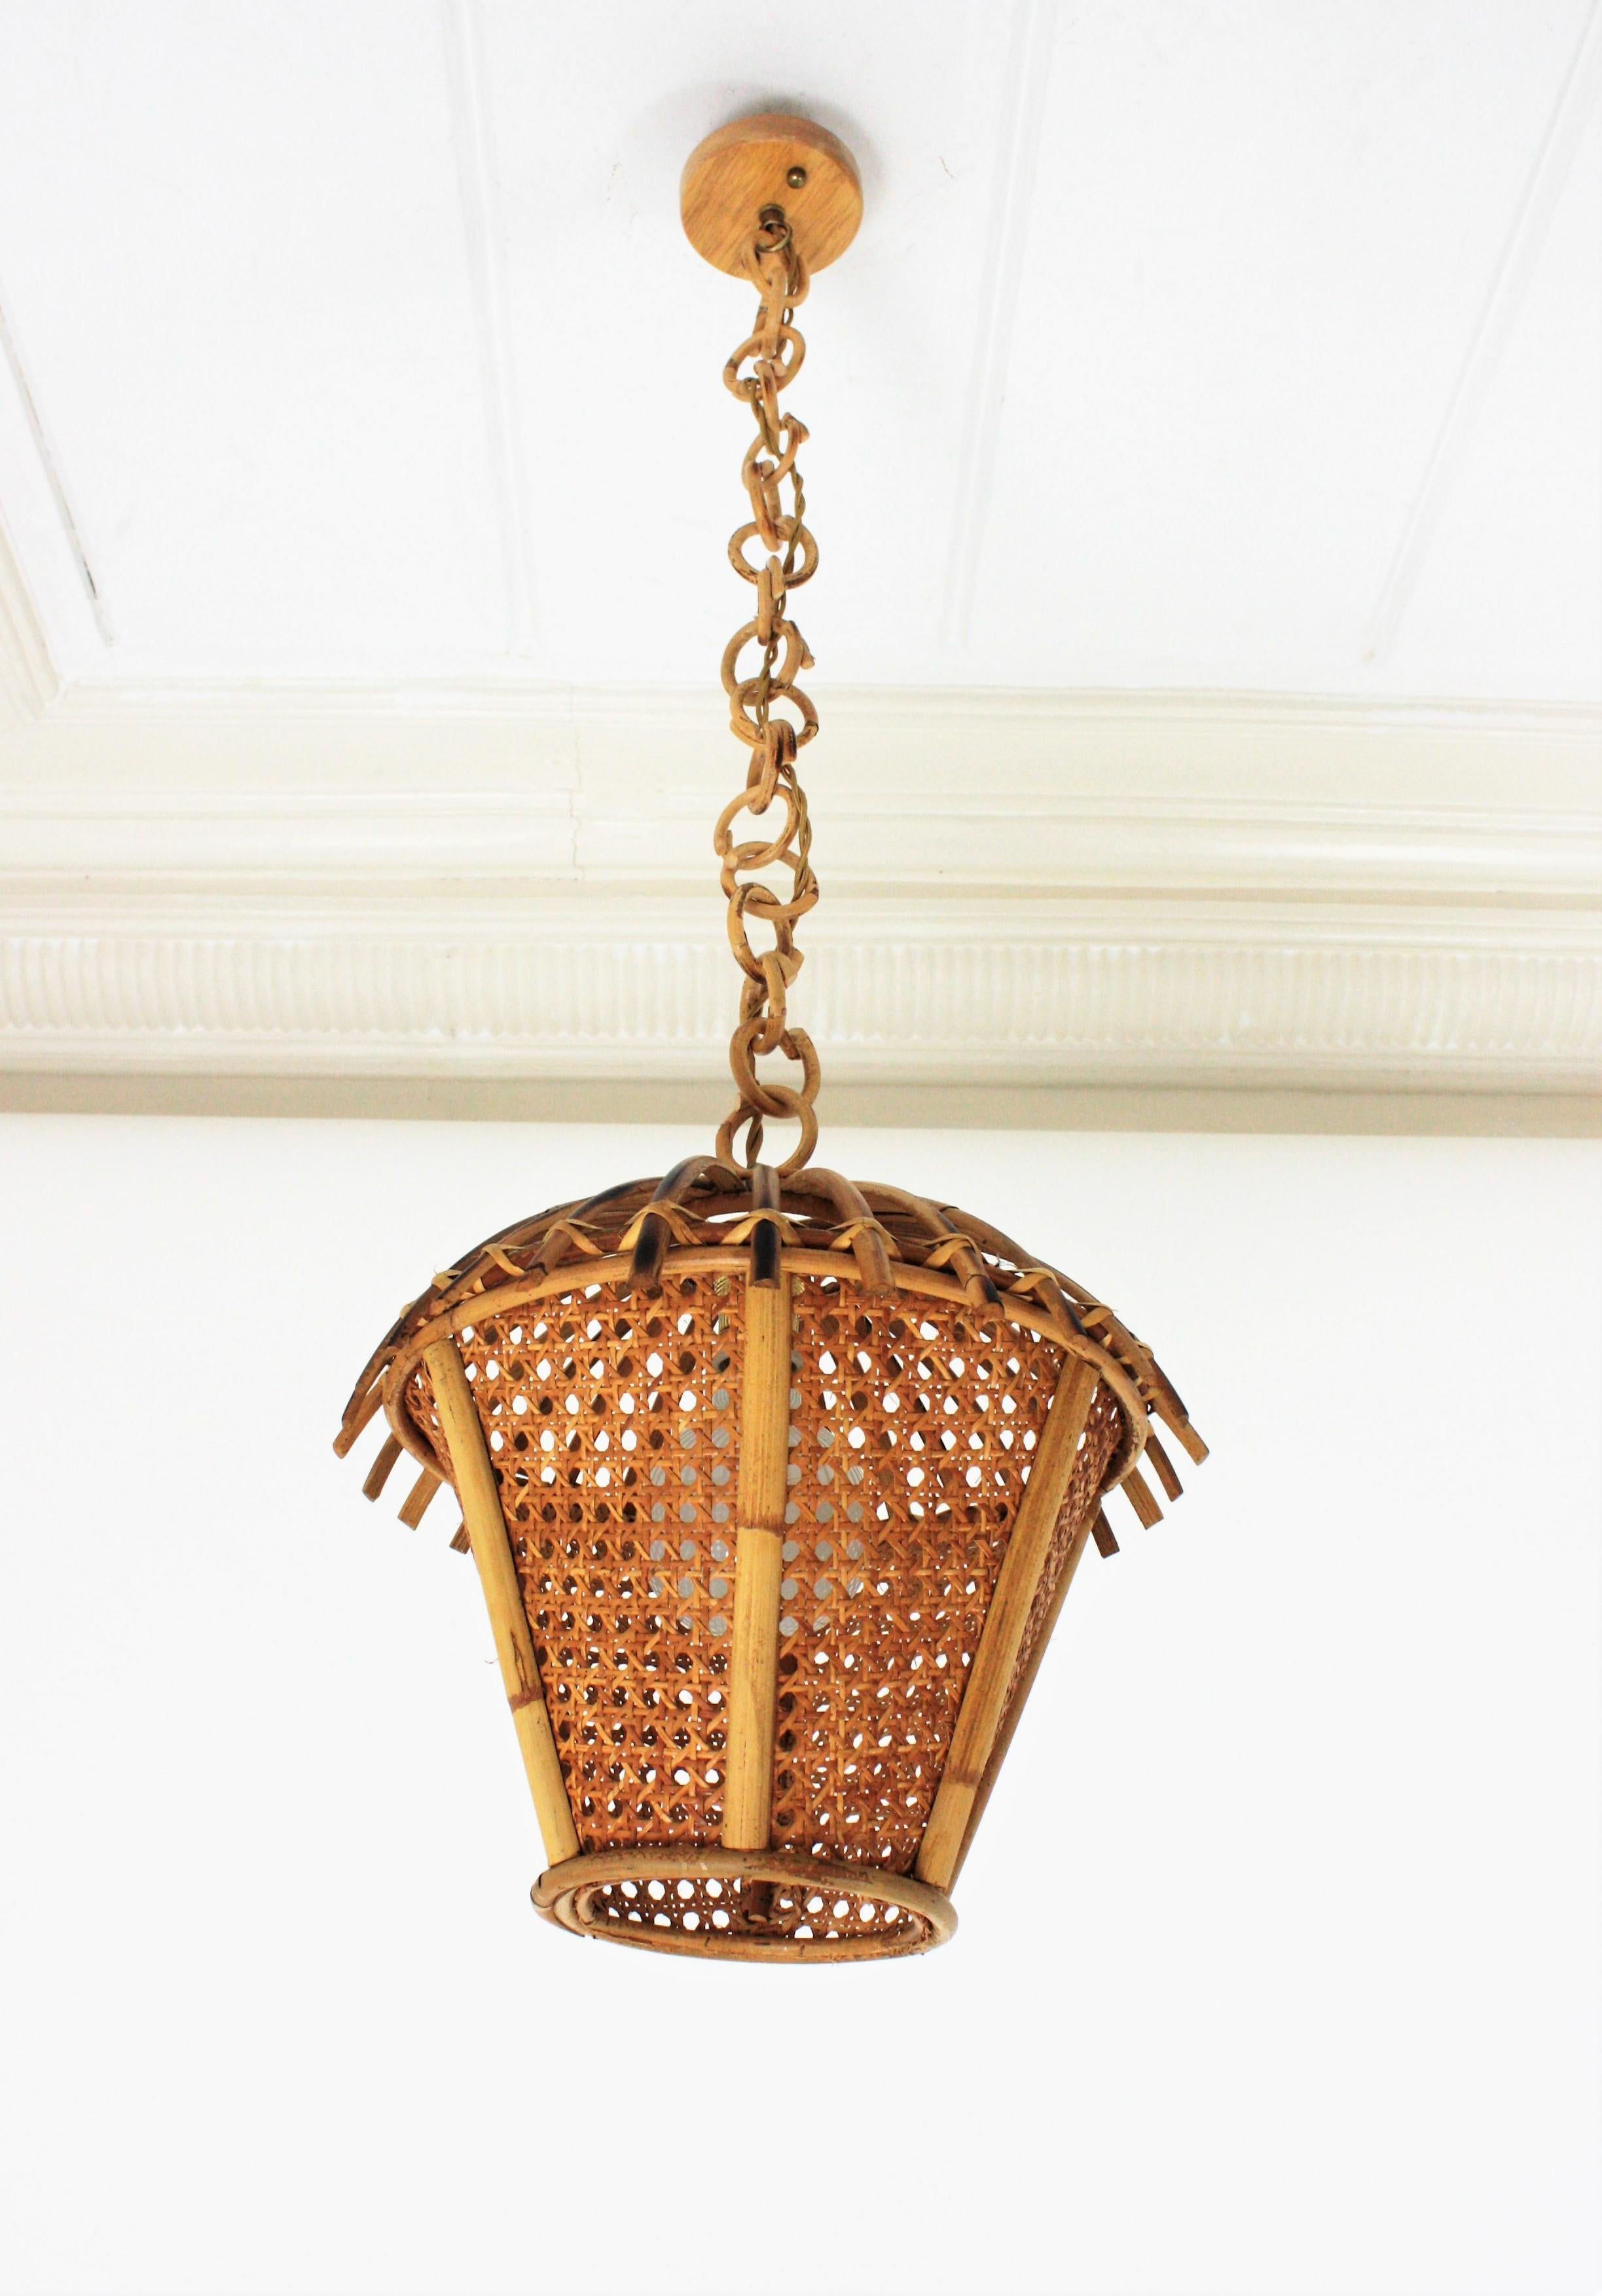 Italian Modernist Rattan and Wicker Wire Pagoda Pendant or Hanging Light, 1960s For Sale 3